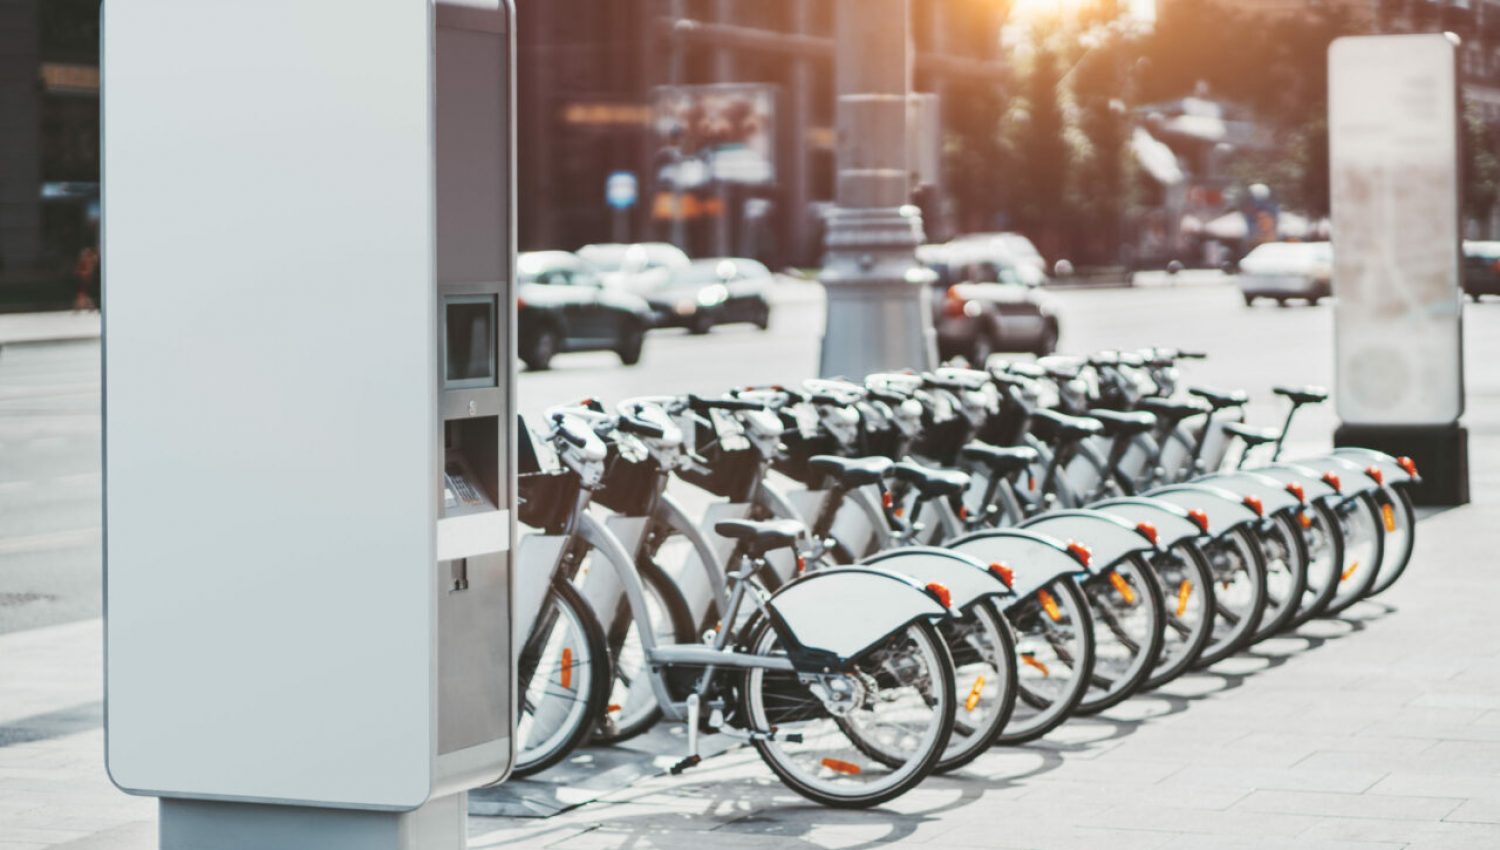 Modern rental electric bikes standing a row during charging on a bright day with a selective focus on the vertical payment terminal with a mock-up of informational or an ad banner placeholder on it